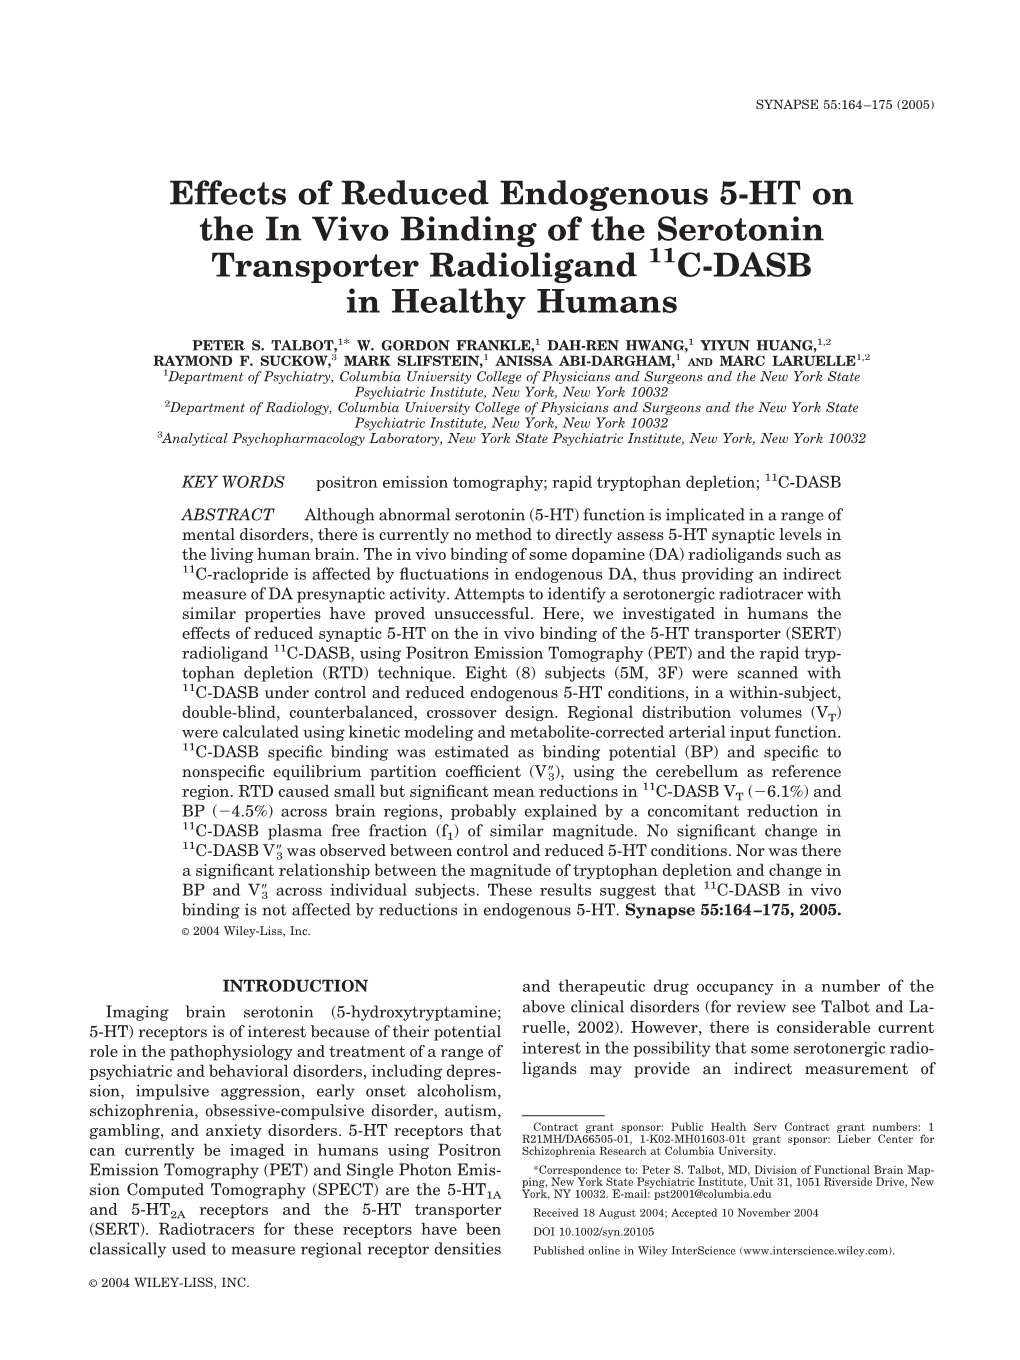 Effects of Reduced Endogenous 5-HT on the in Vivo Binding of the Serotonin Transporter Radioligand 11C-DASB in Healthy Humans